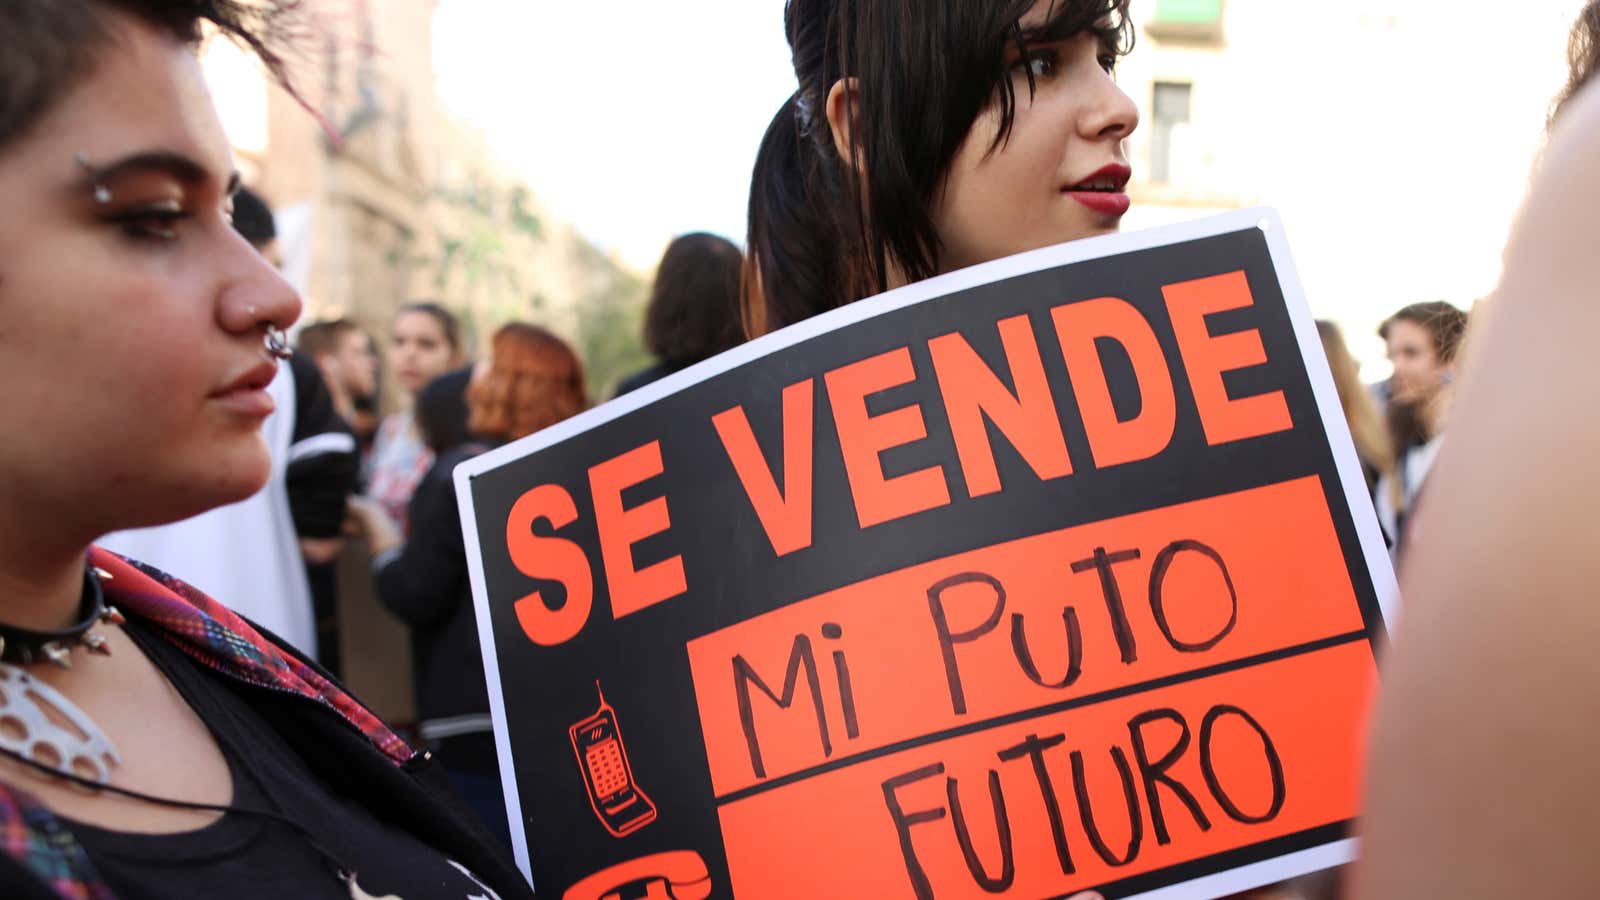 “My fucking future for sale,” says a placard protesting cuts to Spain’s education budget in 2016.